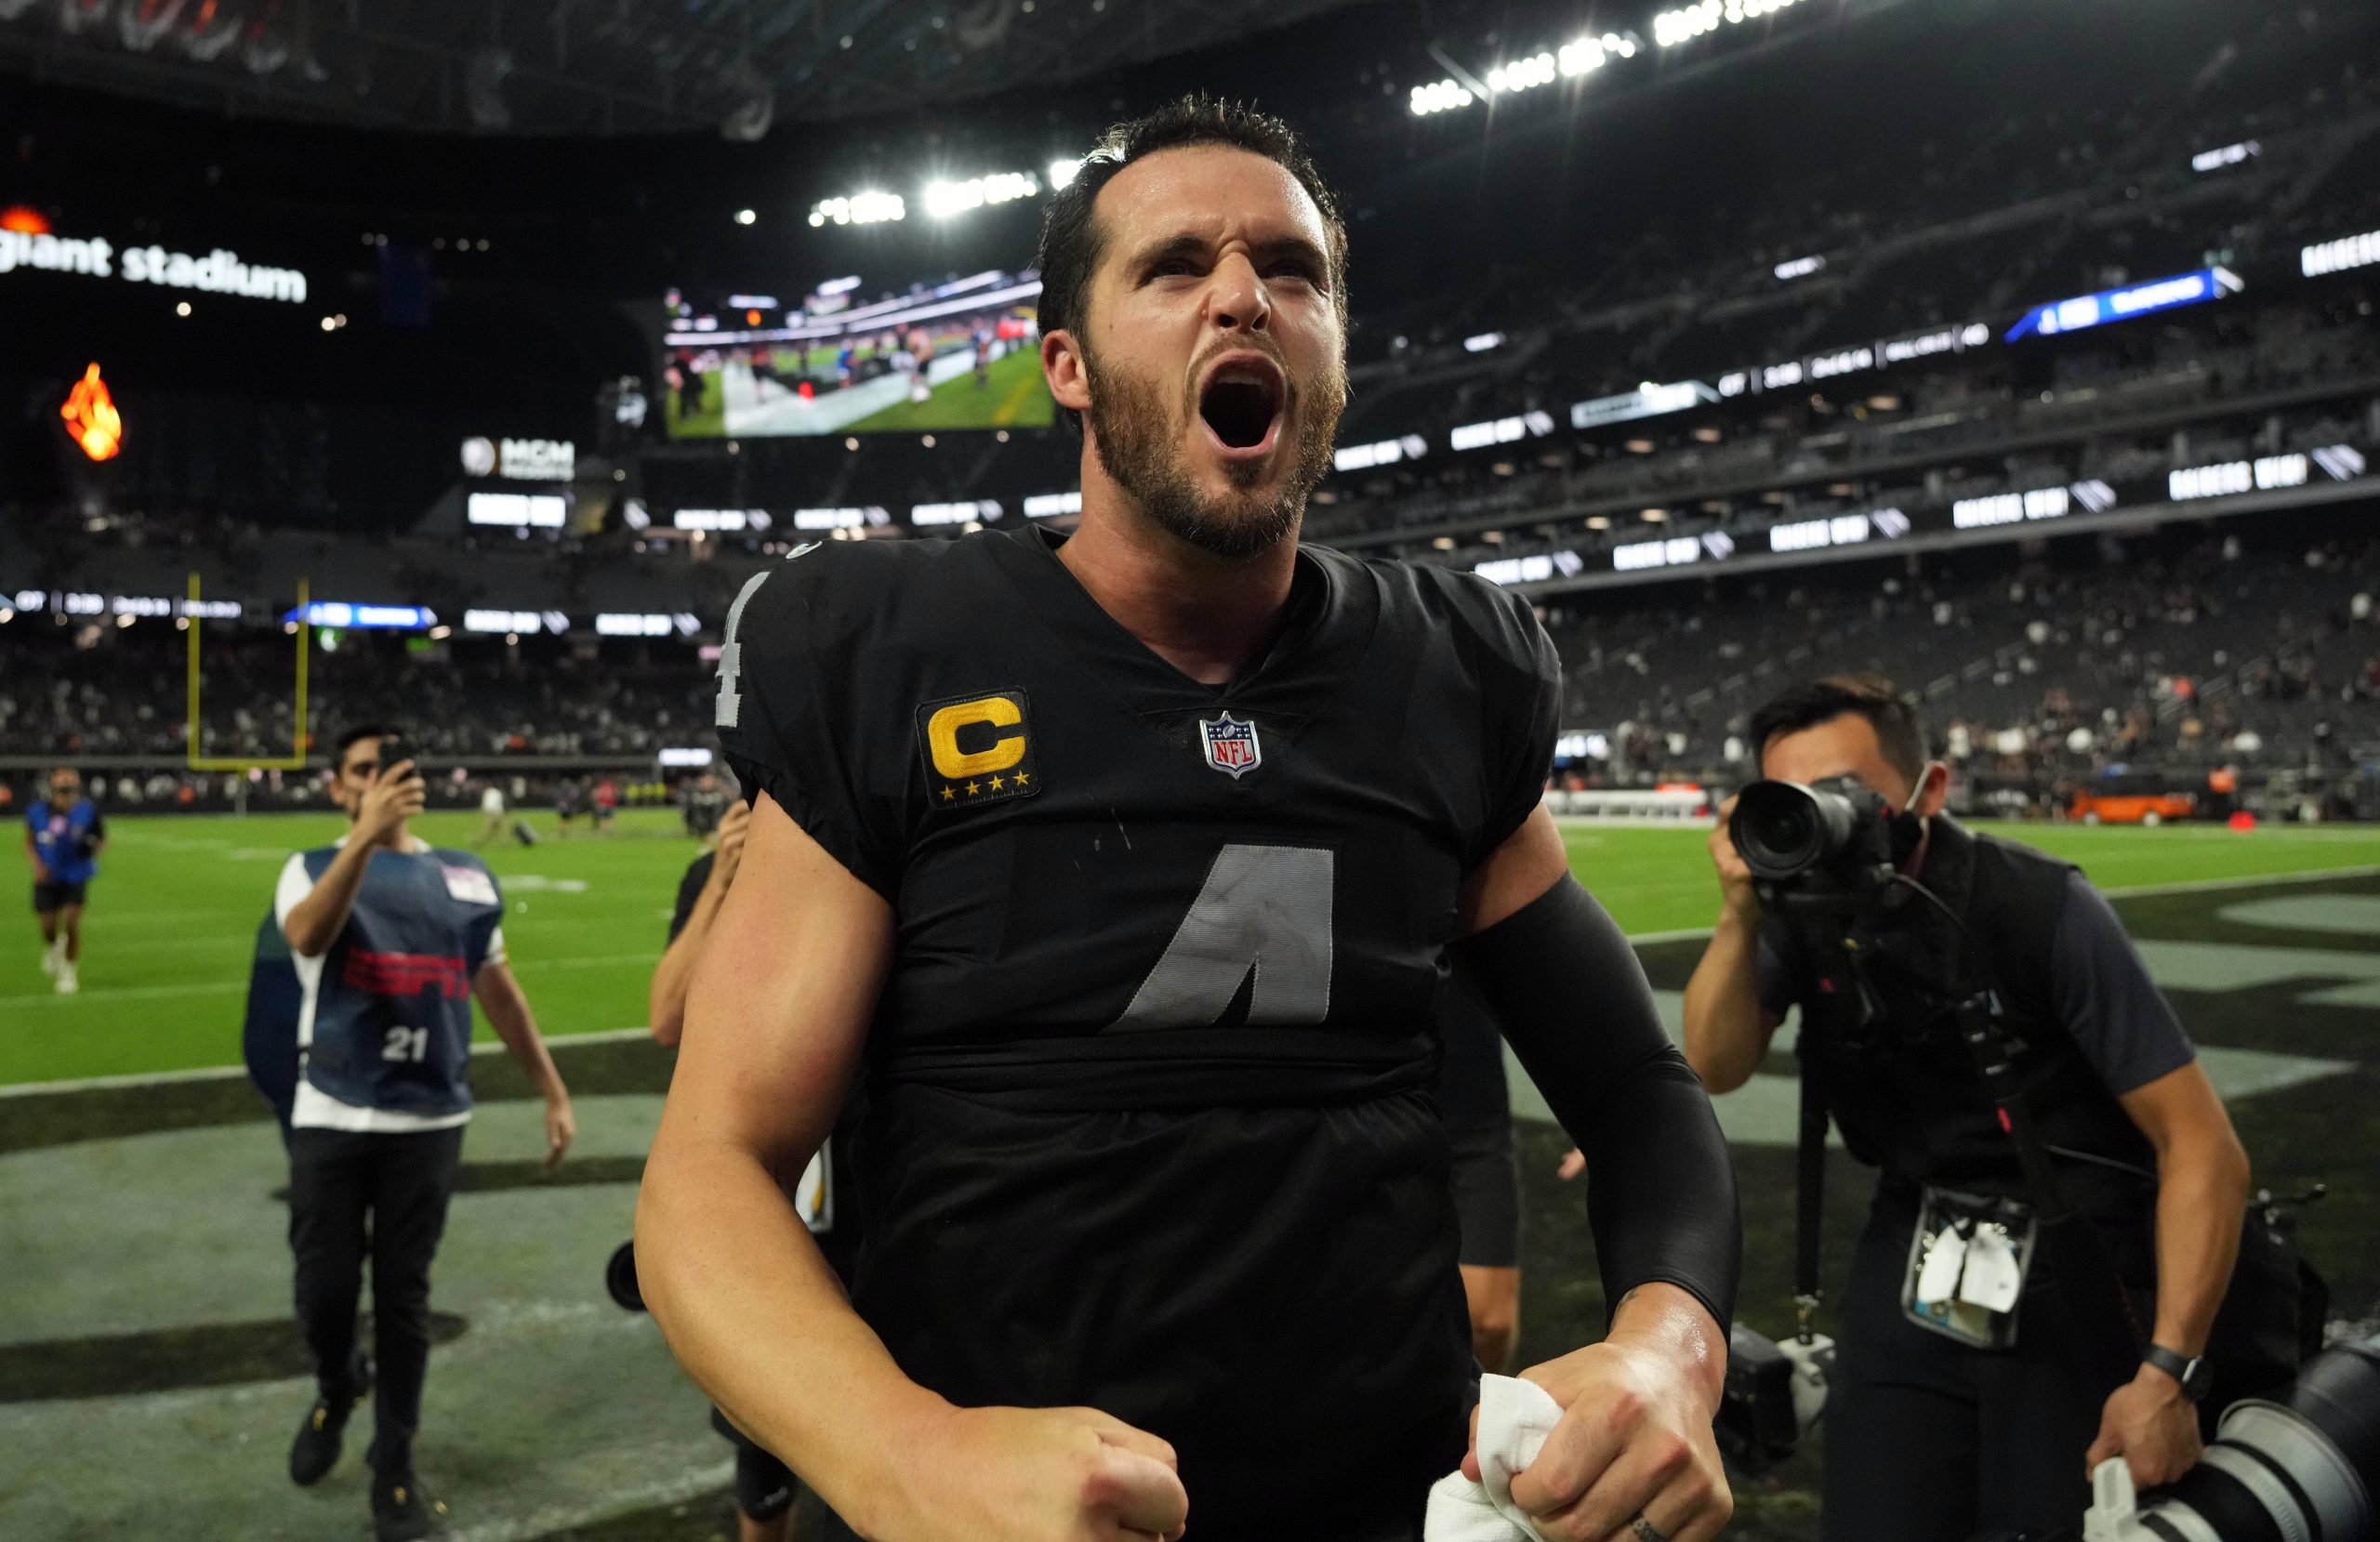 Derek Carr put up 435 yards and two touchdowns against Baltimore in Week 1